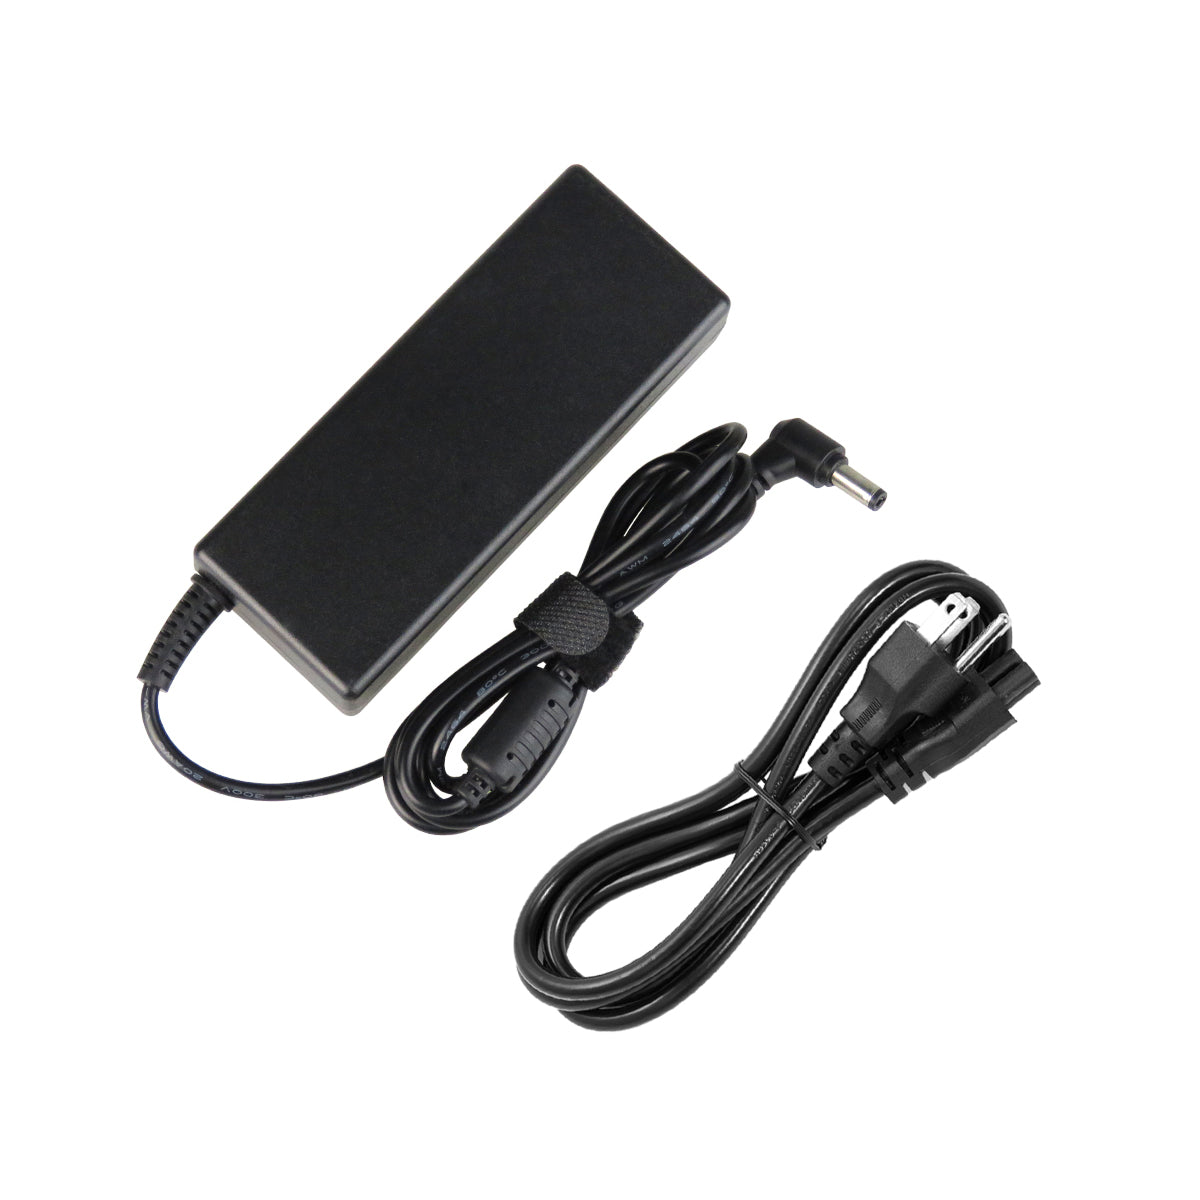 AC Adapter Charger for ASUS K53SK Notebook.